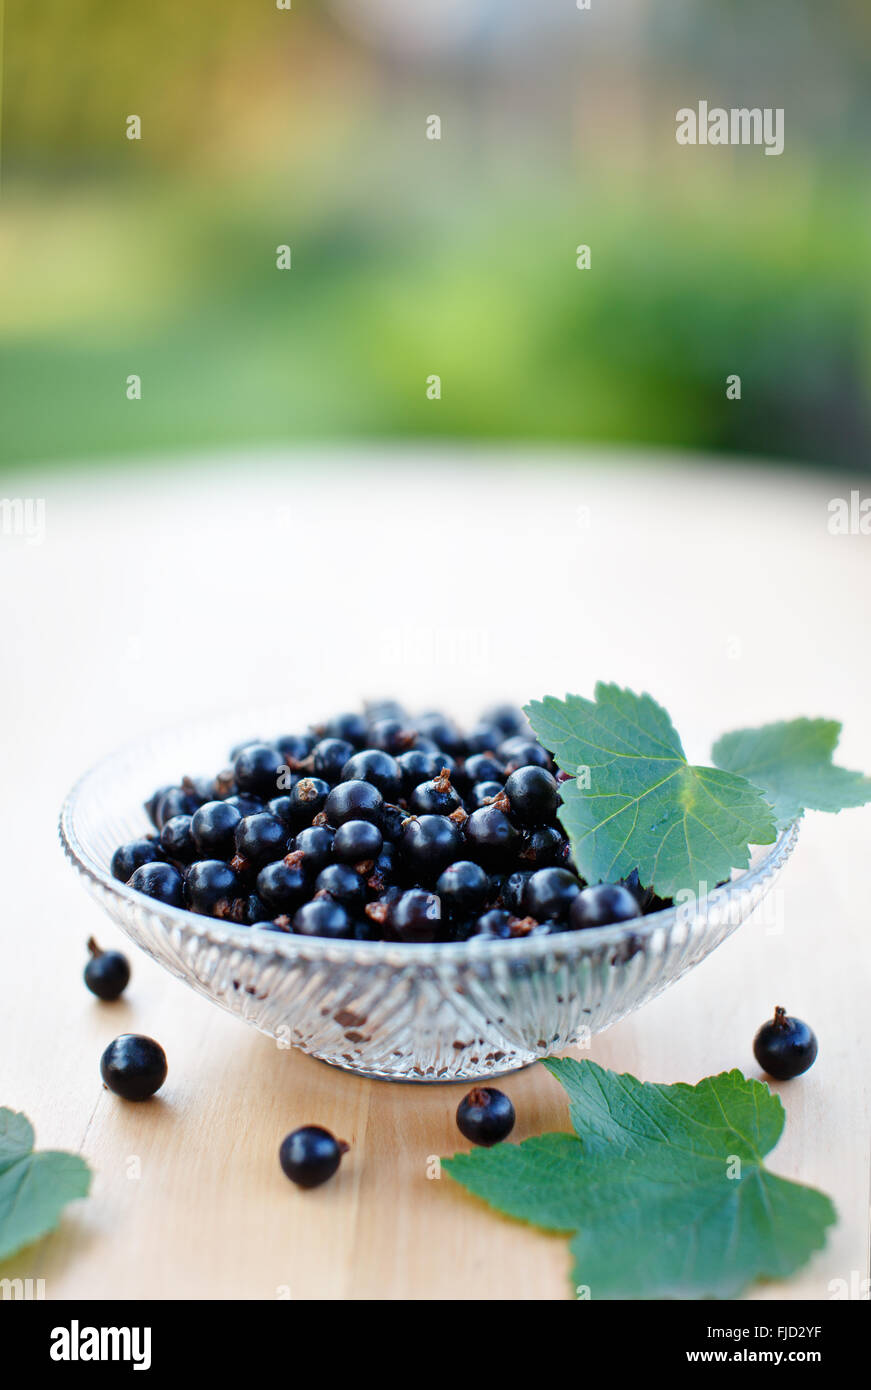 Ripe black currant berries in glass bowl on wooden table. Shallow depth of field Stock Photo